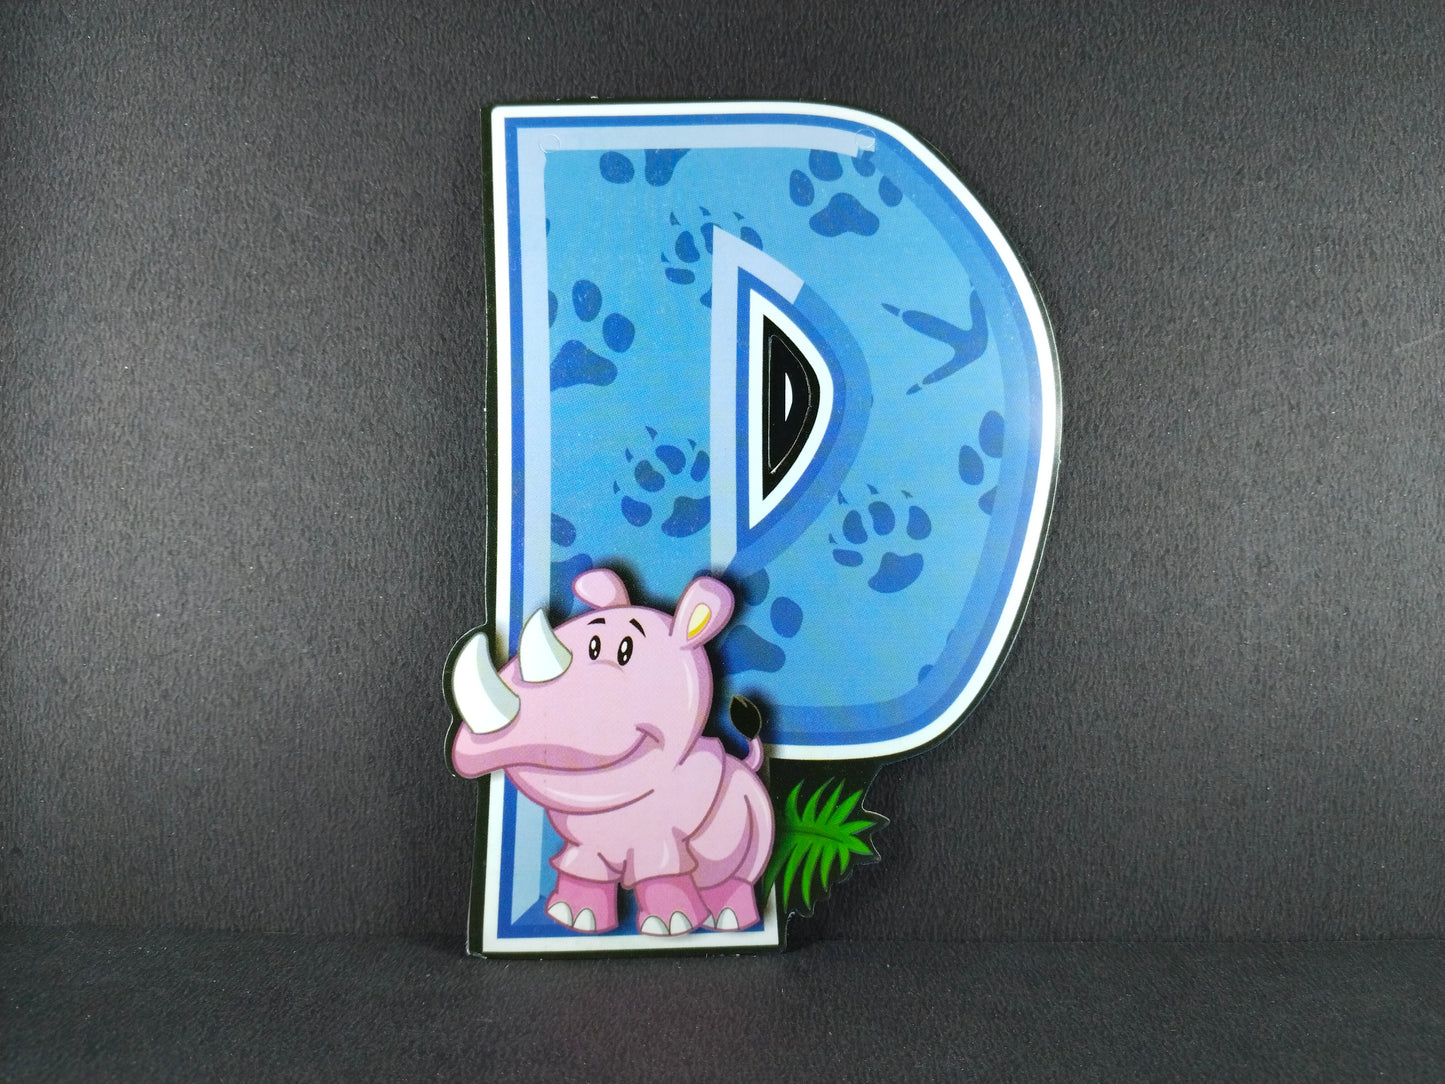 Birthday Banner - Animal Theme for Simple birthday decorations at Home